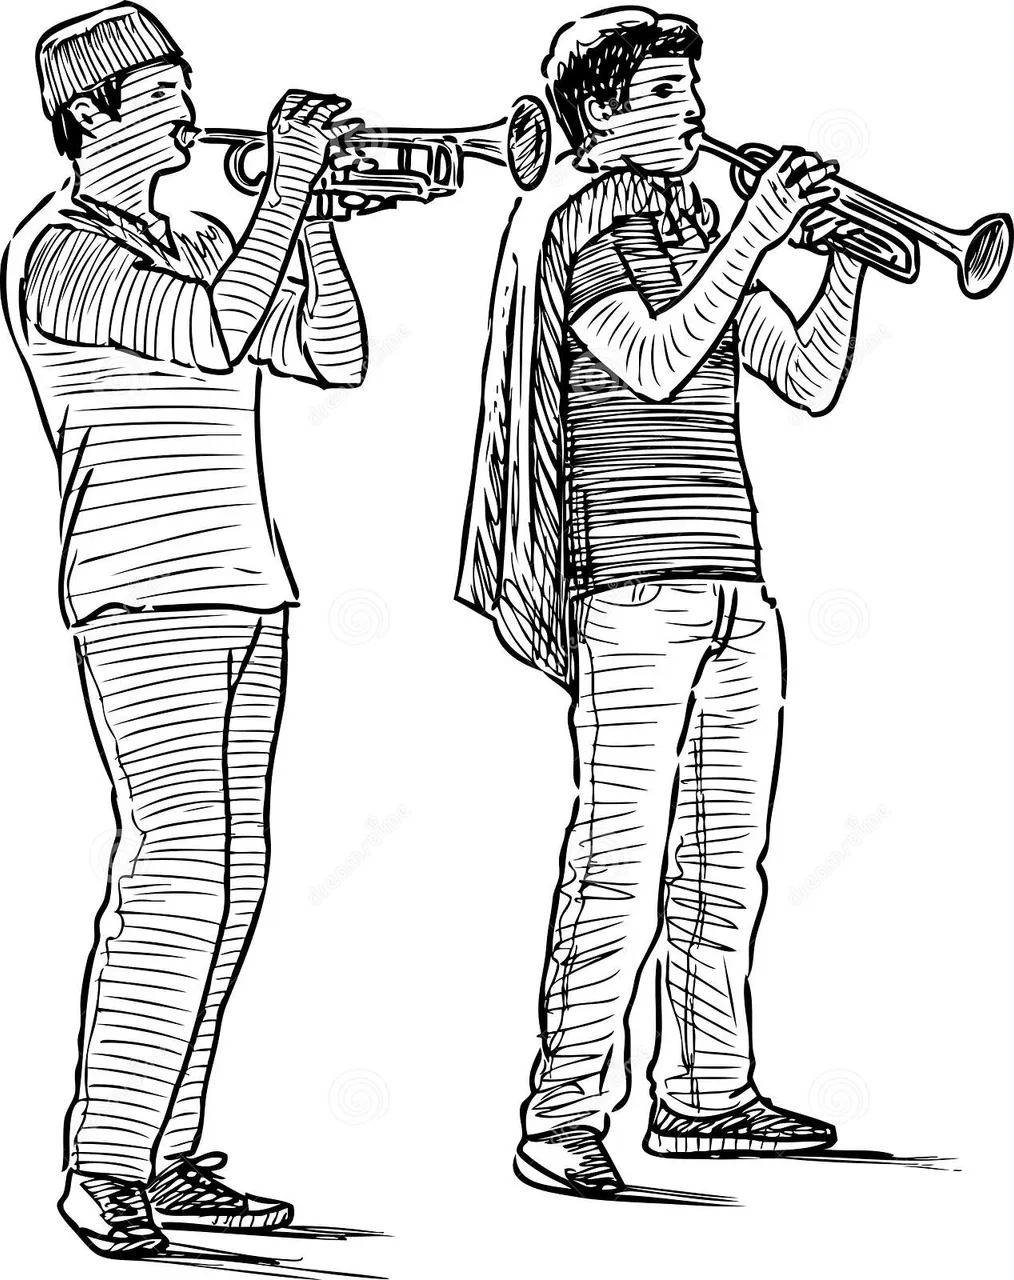 freehand_drawing_duet_young_trumpeters_playing_outdoors_183206827.jpg